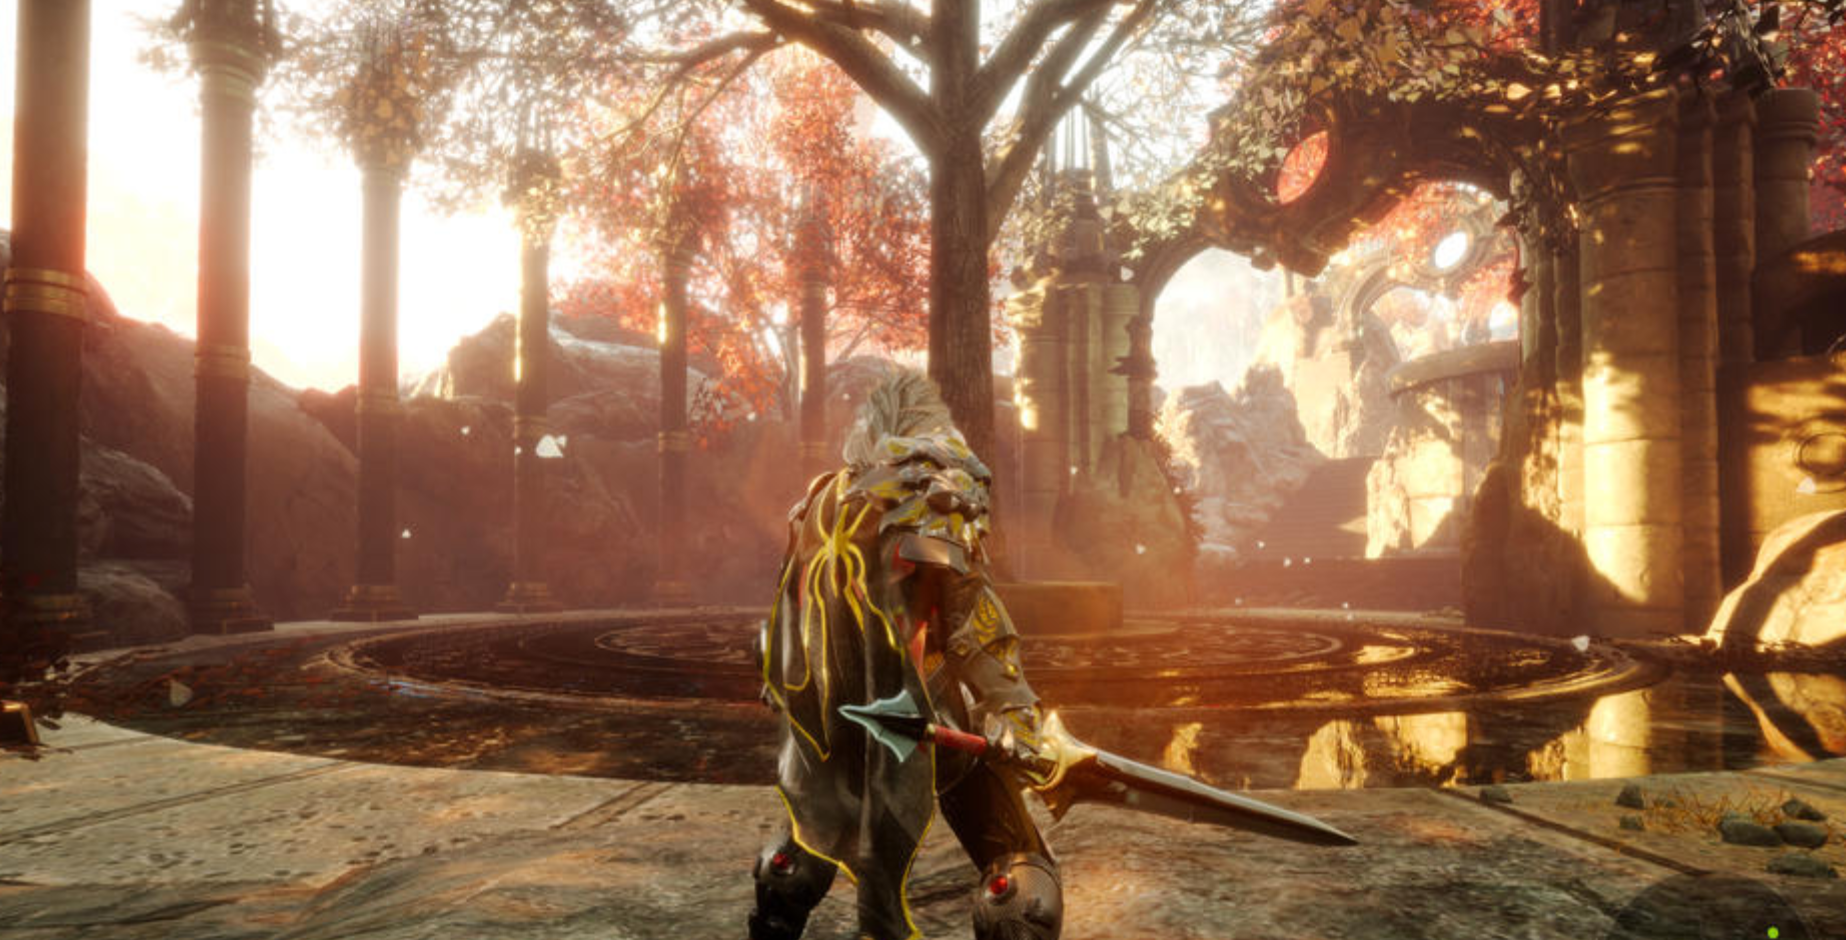 gameplay from video game godfall